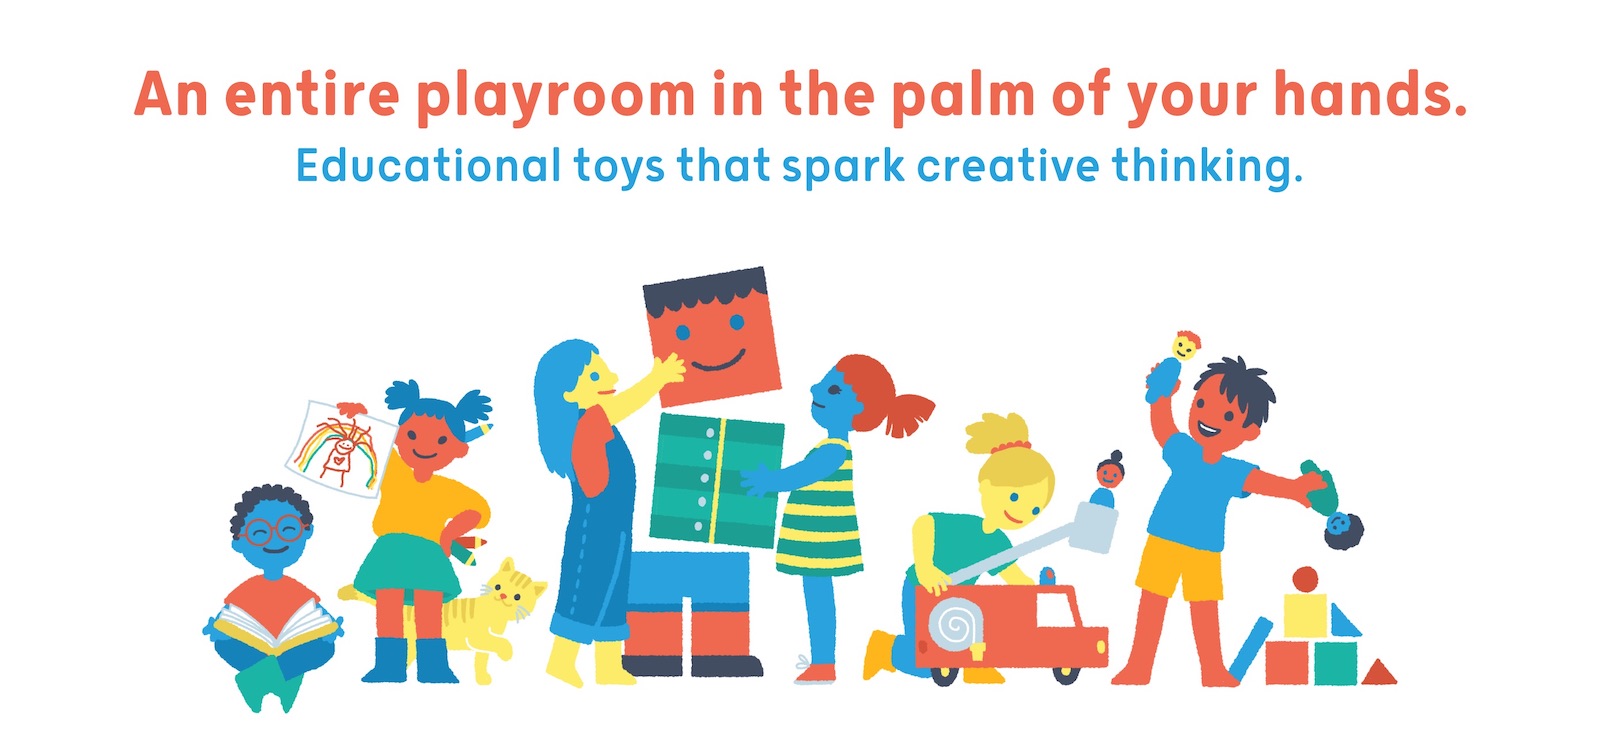 An entire playroom in the palm of your hands: Pok Pok